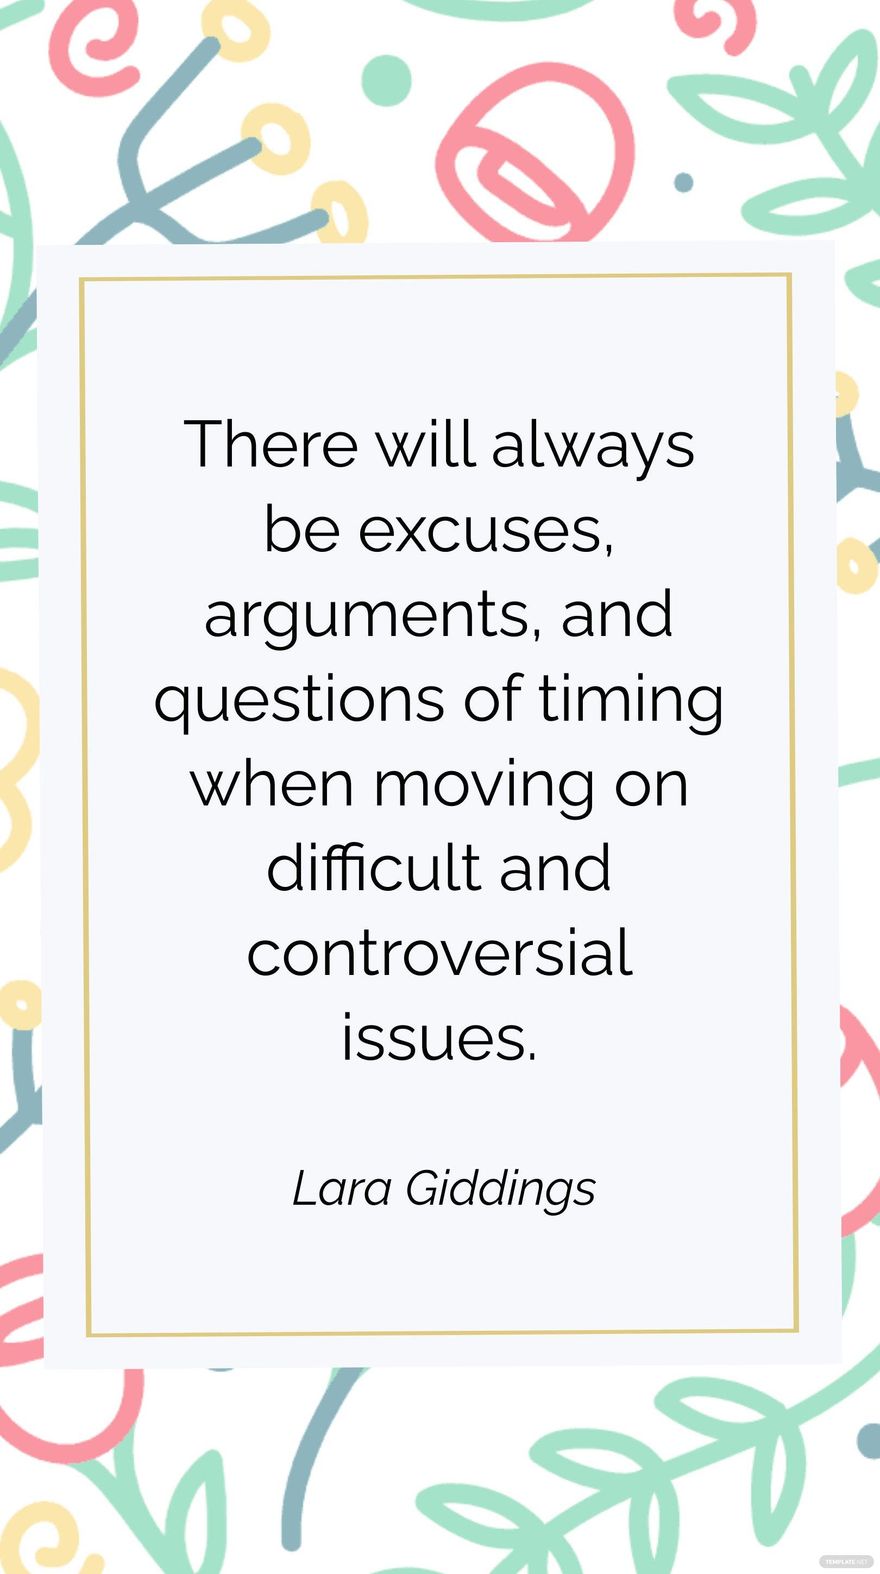 Lara Giddings - There will always be excuses, arguments, and questions of timing when moving on difficult and controversial issues.